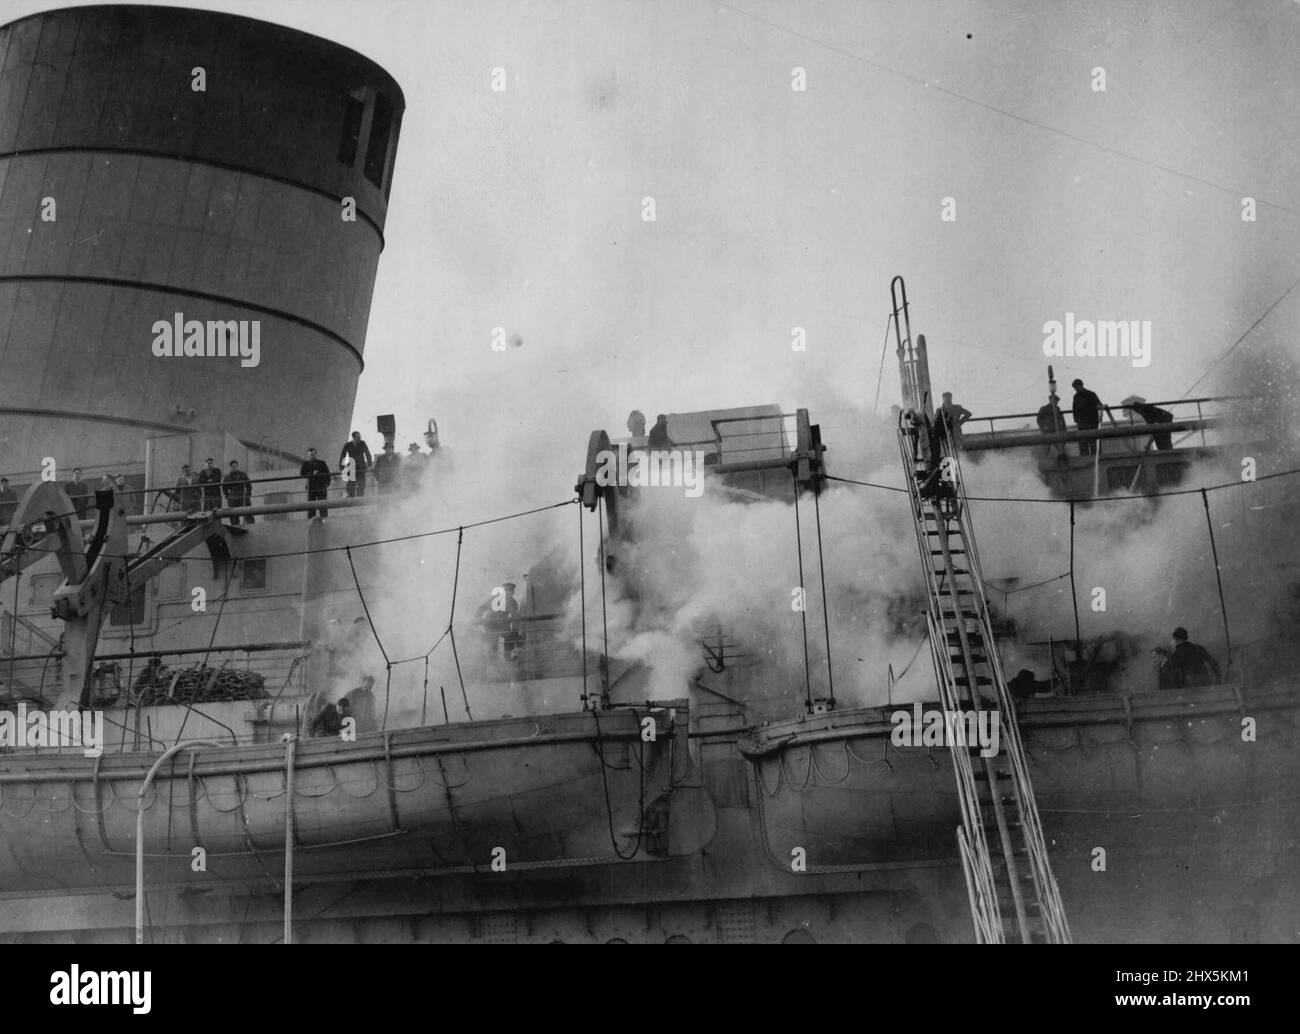 Mystery Fire In Queen Elizabeth -- Firemen and dock hands are seen fighting the blaze on board the Queen Elizabeth, today March 8, which broke out in the bedding store of the isolation hospital on the Port side of the promenade deck. A Mystery fire broke out in the world's largest liner - The Queen Elizabeth, in dock at Southampton, today March 8. Police assisted by Cunard White Star officials are probing the mystery of the outbreak, which luckily confined to the isolation hospital. It has been officially stated that the damage to the £6,000,000 liner is slight. March 08, 1946. (Photo by Stock Photo